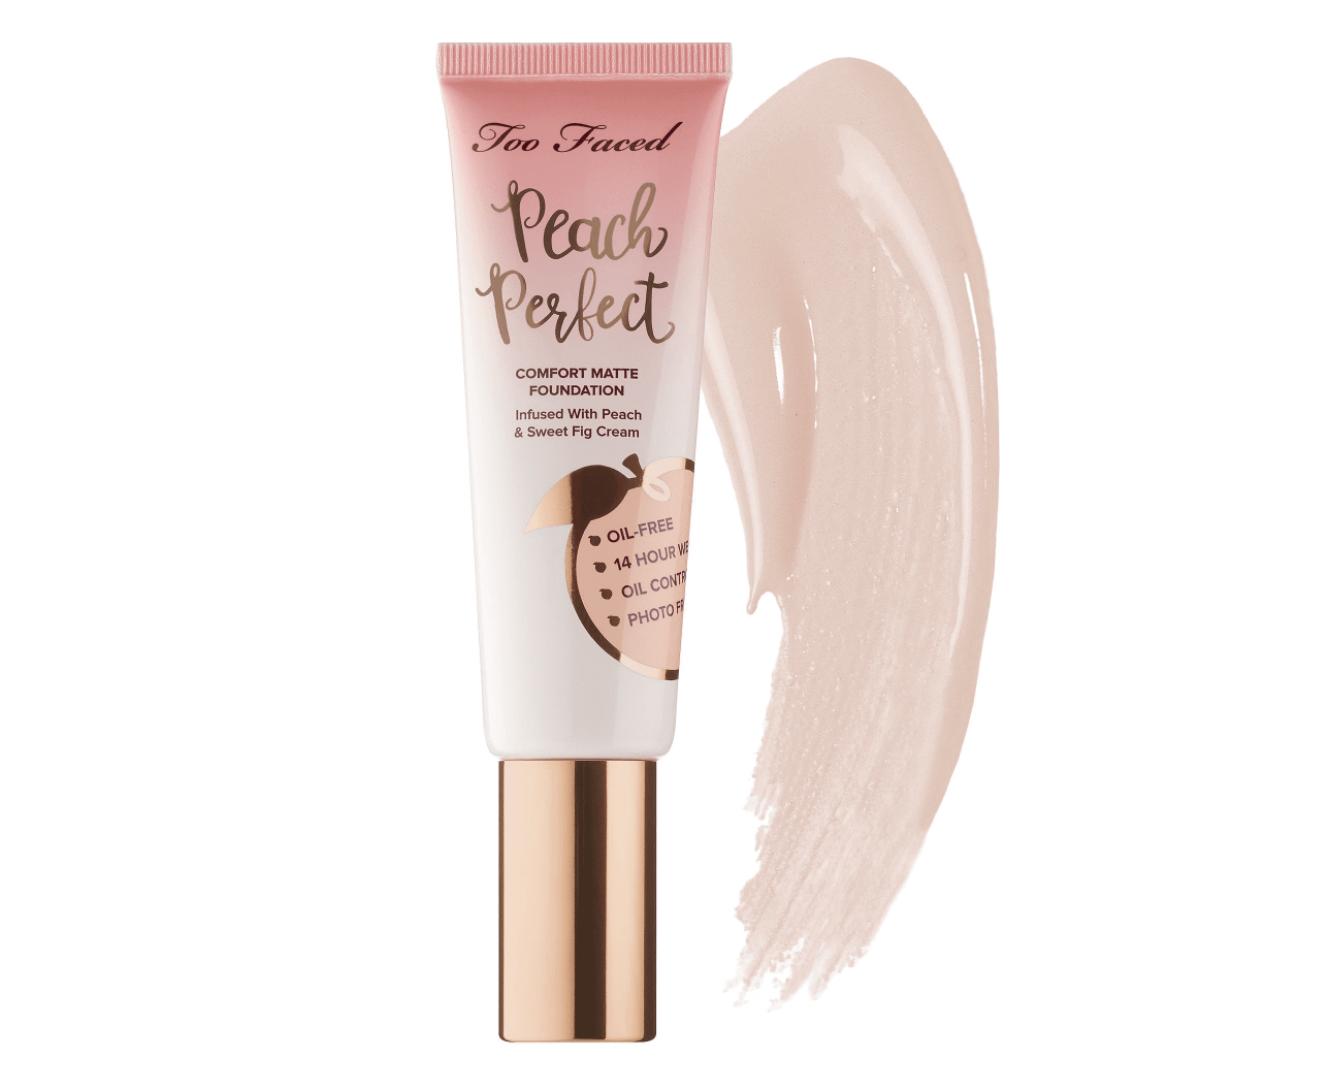 Too Faced Peach Perfect Comfort Matte Foundation Seashell